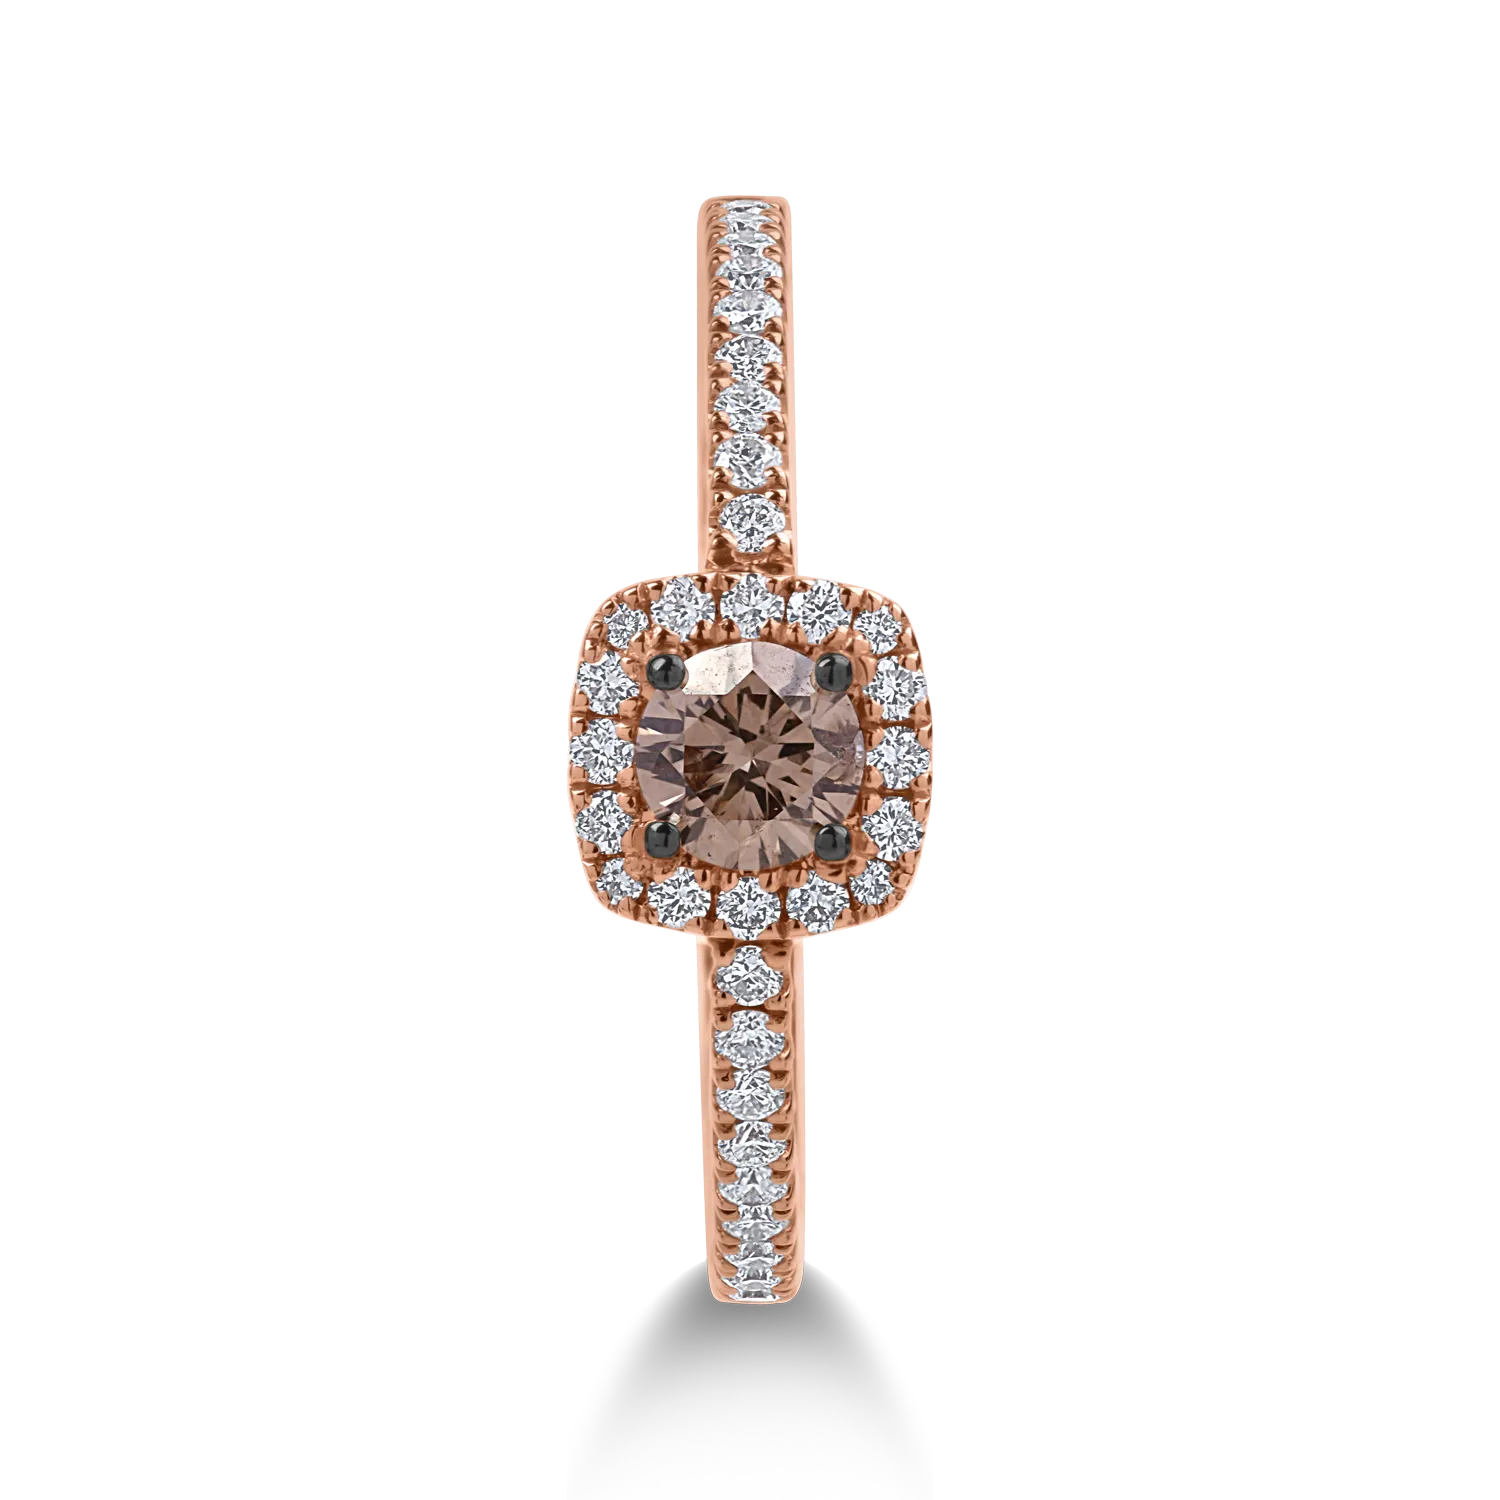 Rose gold ring with 0.25ct brown diamond and 0.23ct clear diamonds